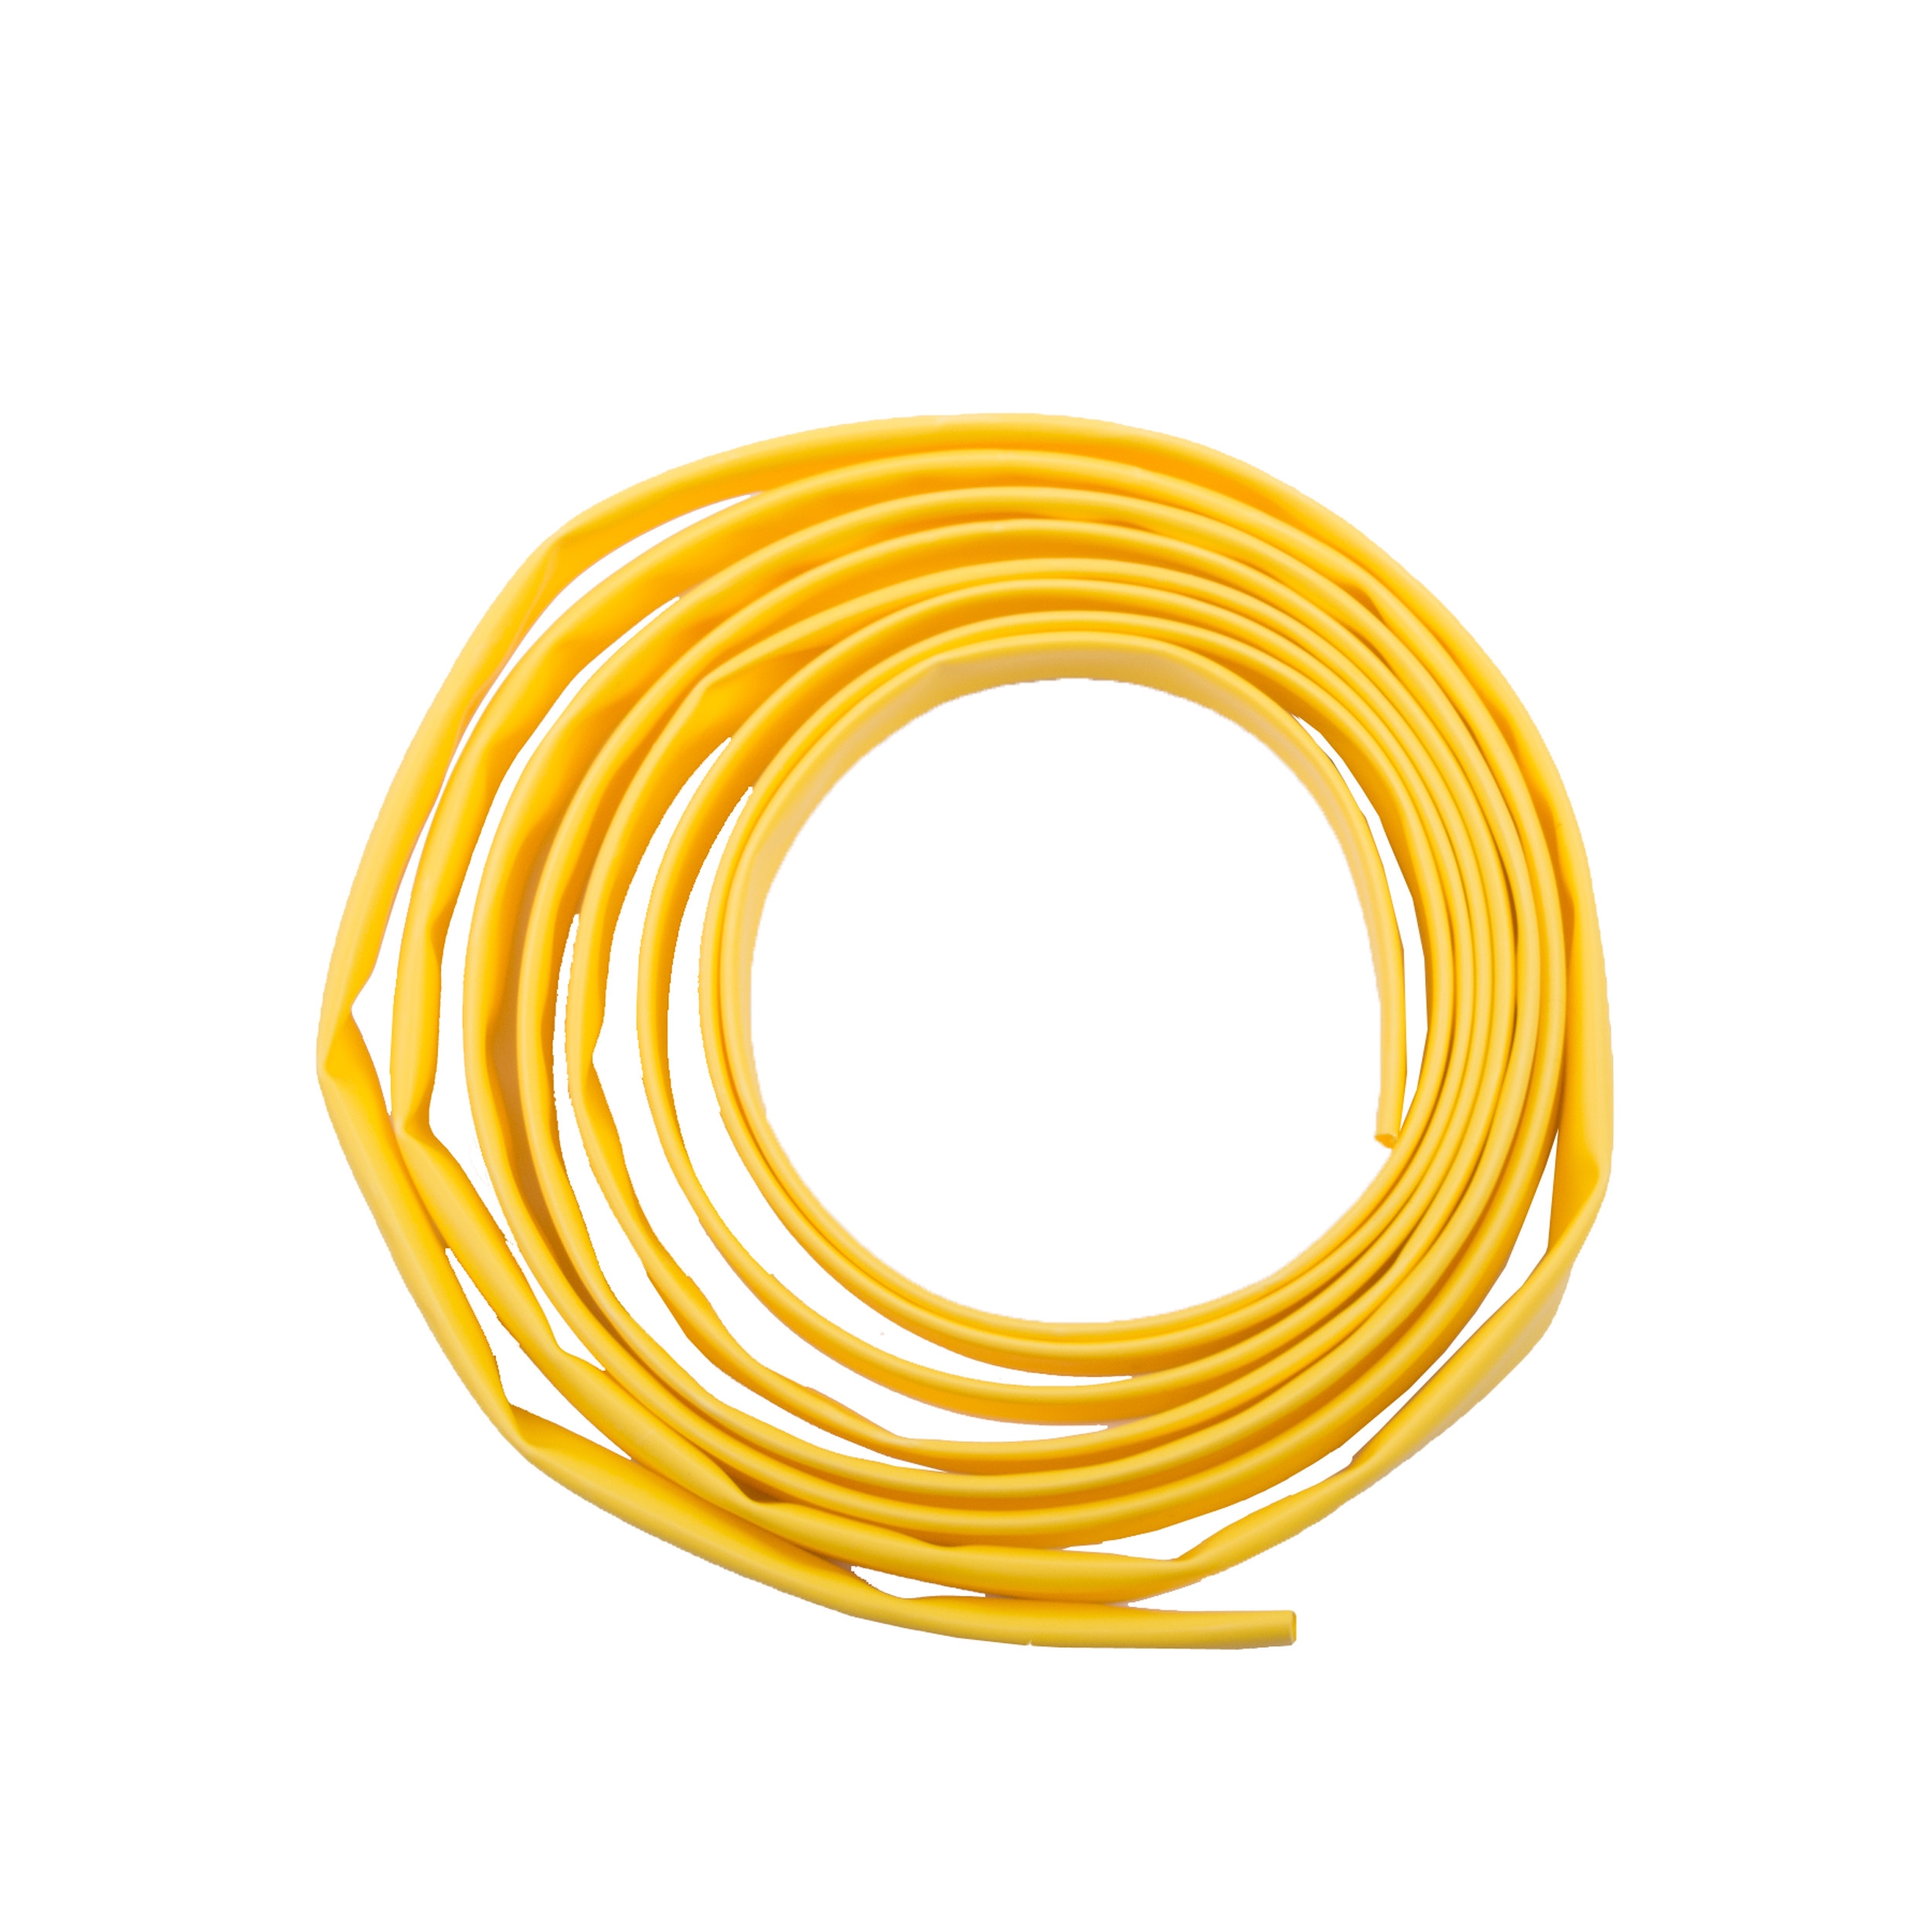 HST-102 Heat Shrink Tubing, 5/16 to 5/32 in Dia, 8 ft L, PVC, Yellow